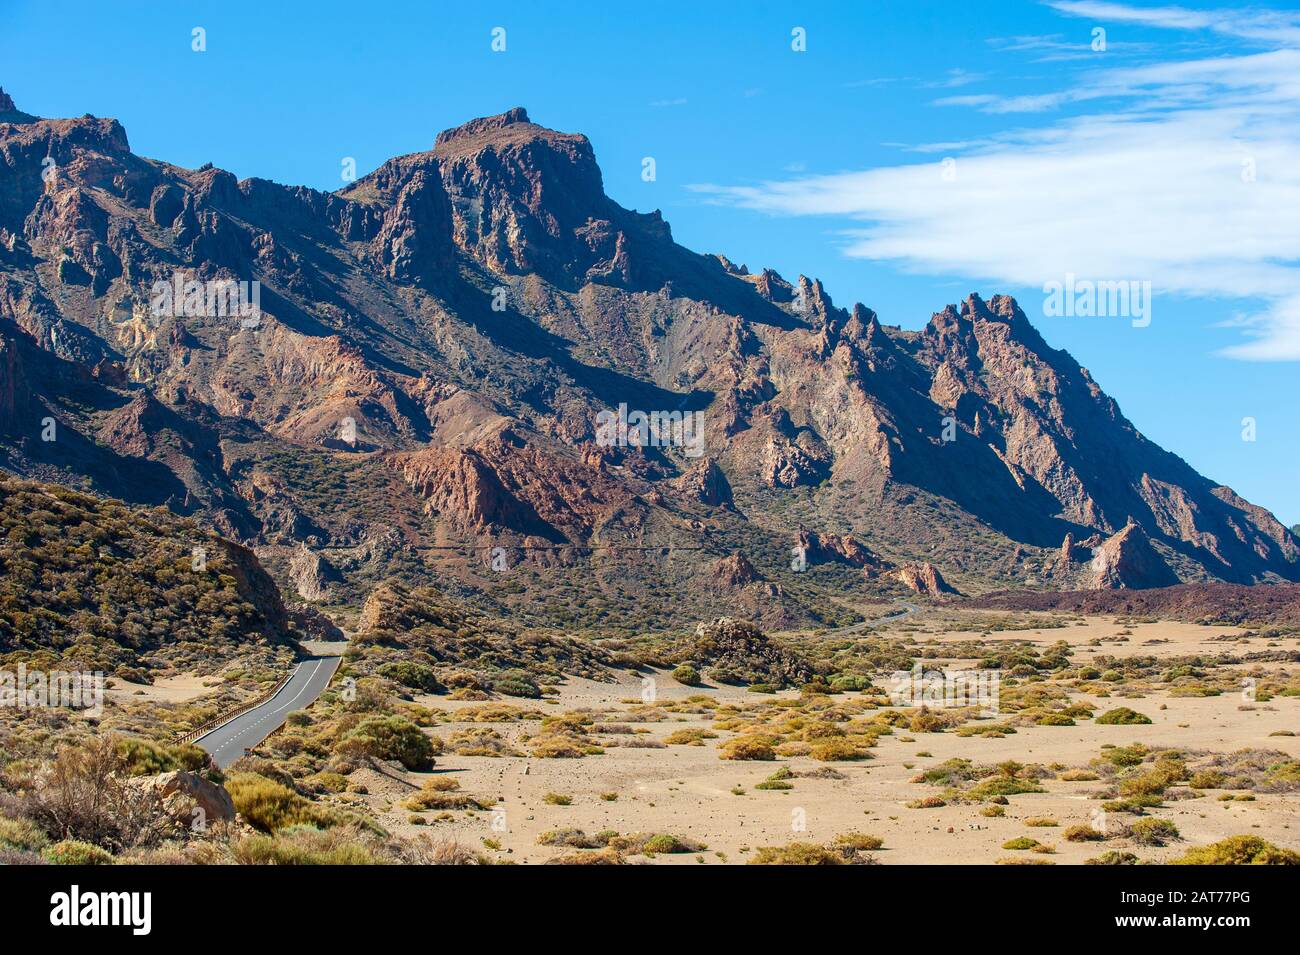 Teide national park on Canary Island Tenerife is the most popular destination for tourists. Stock Photo